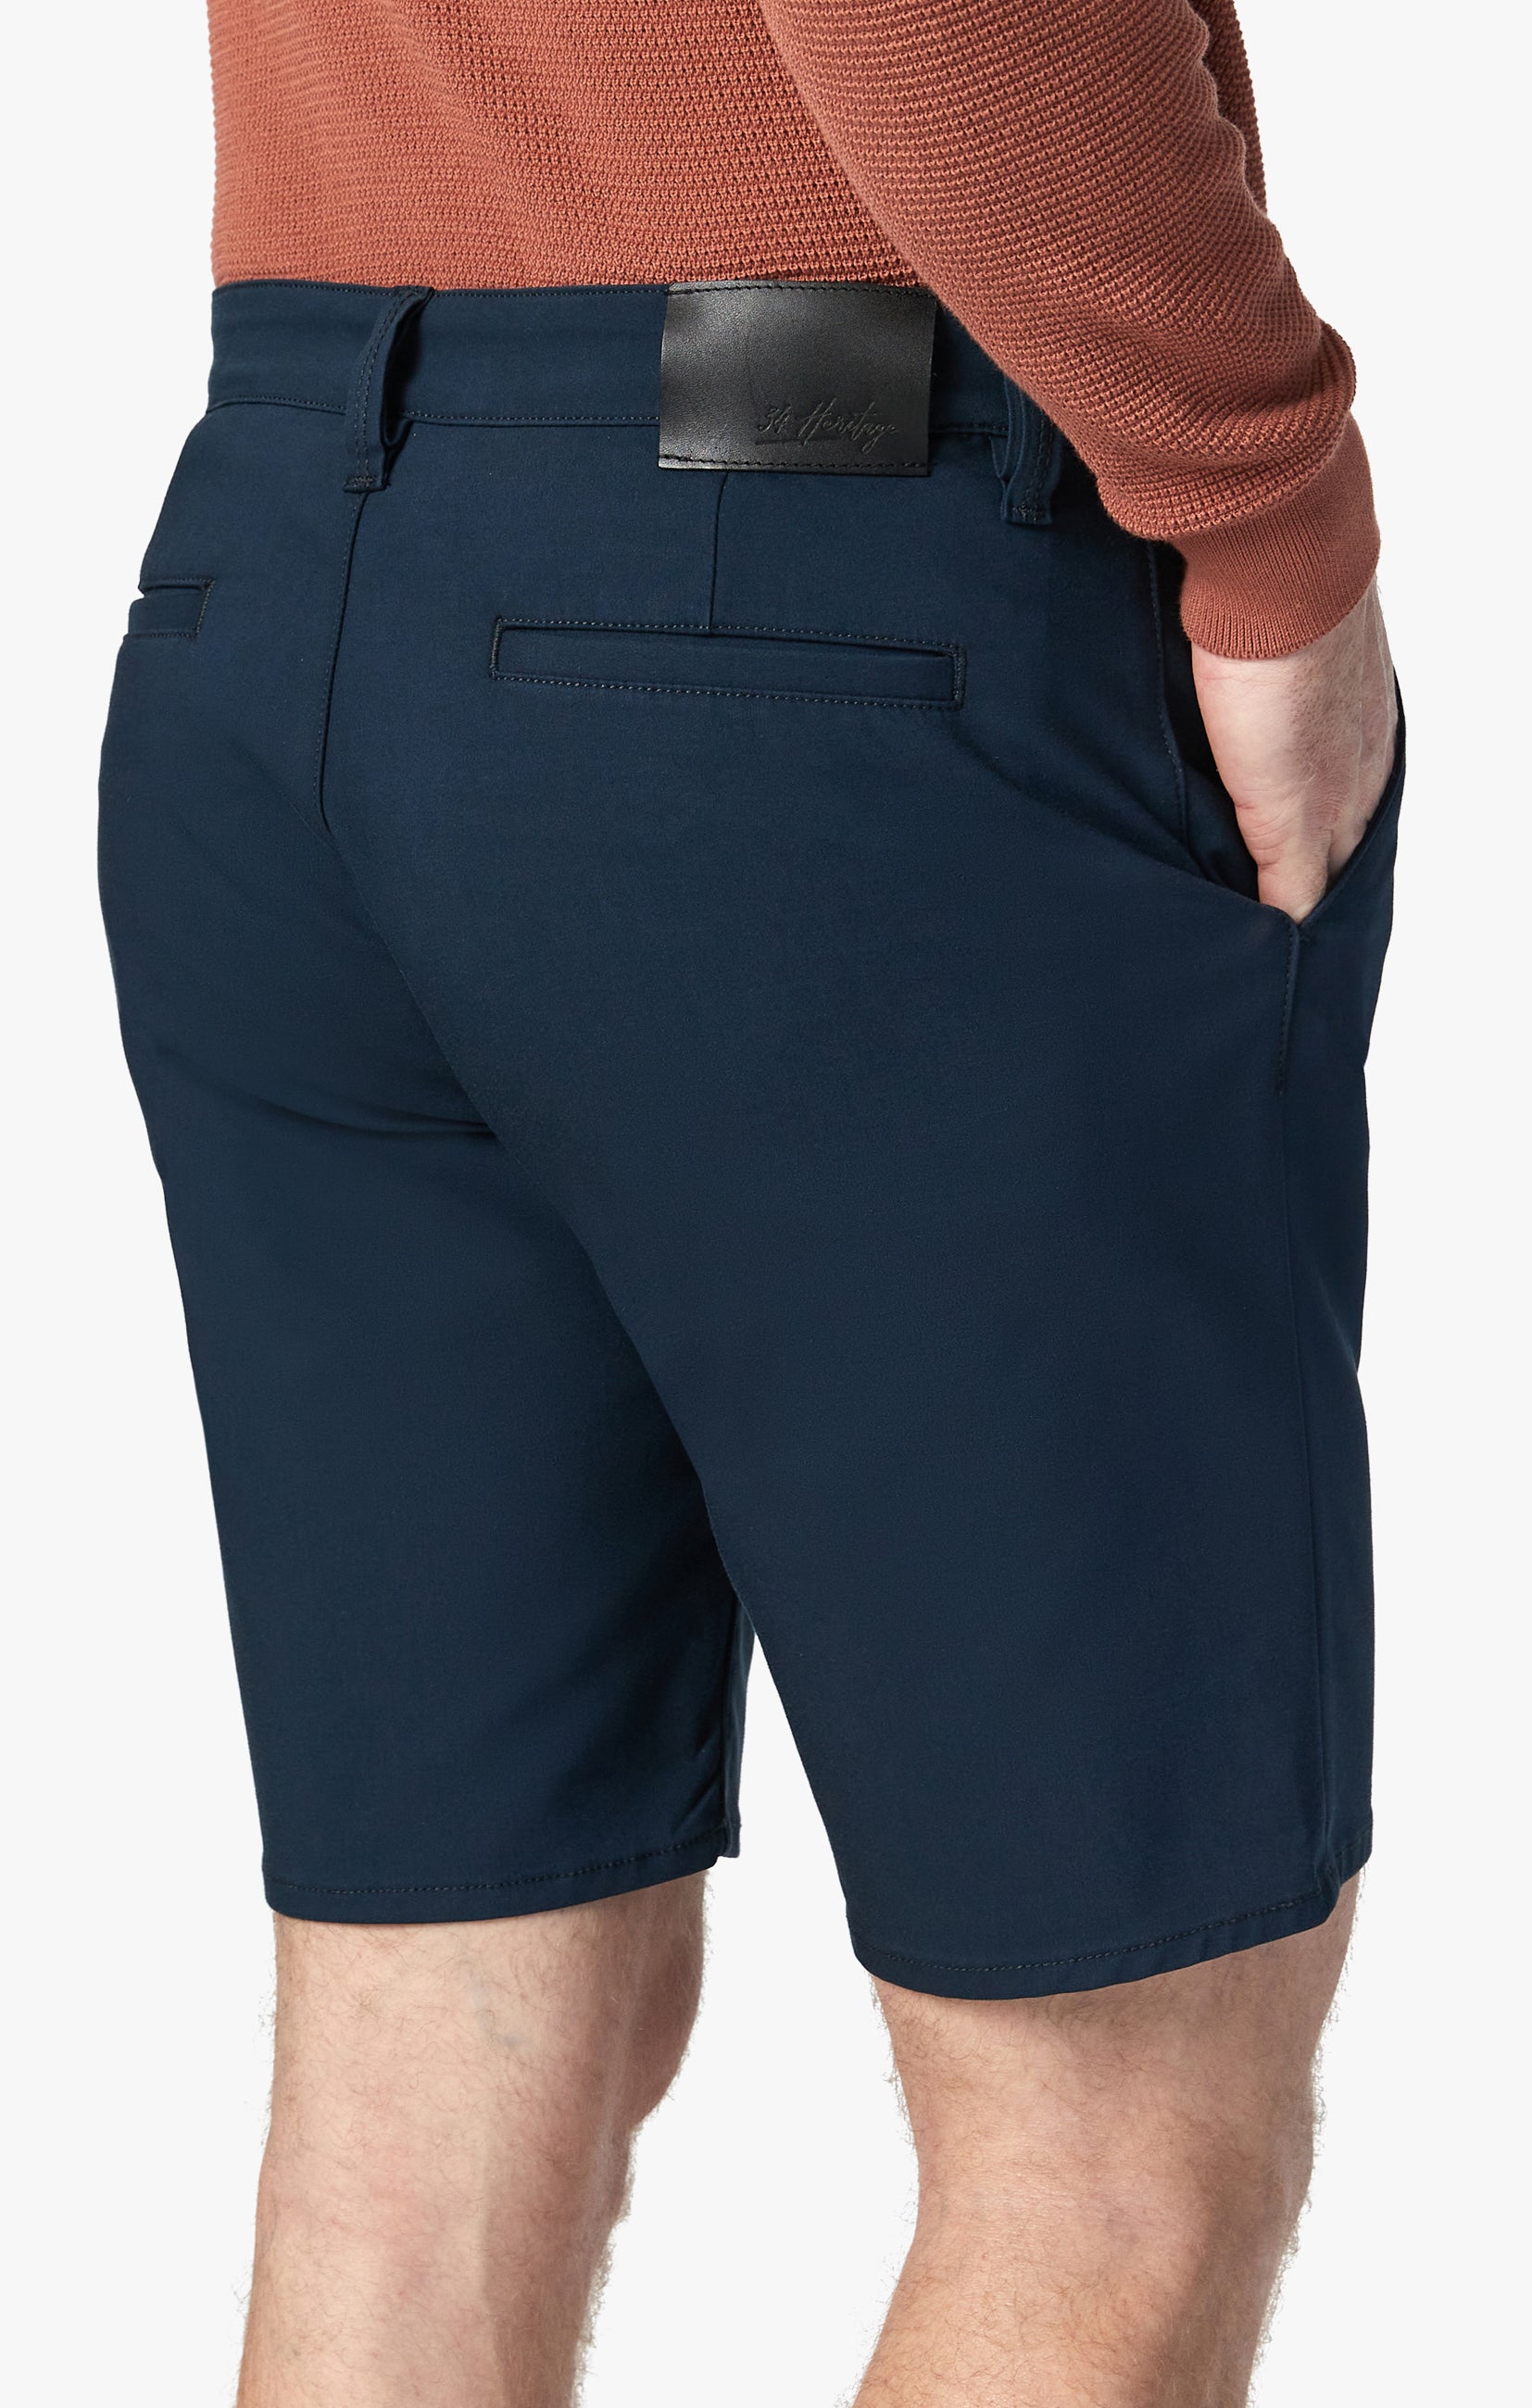 Como Shorts in Navy Commuter Image 7